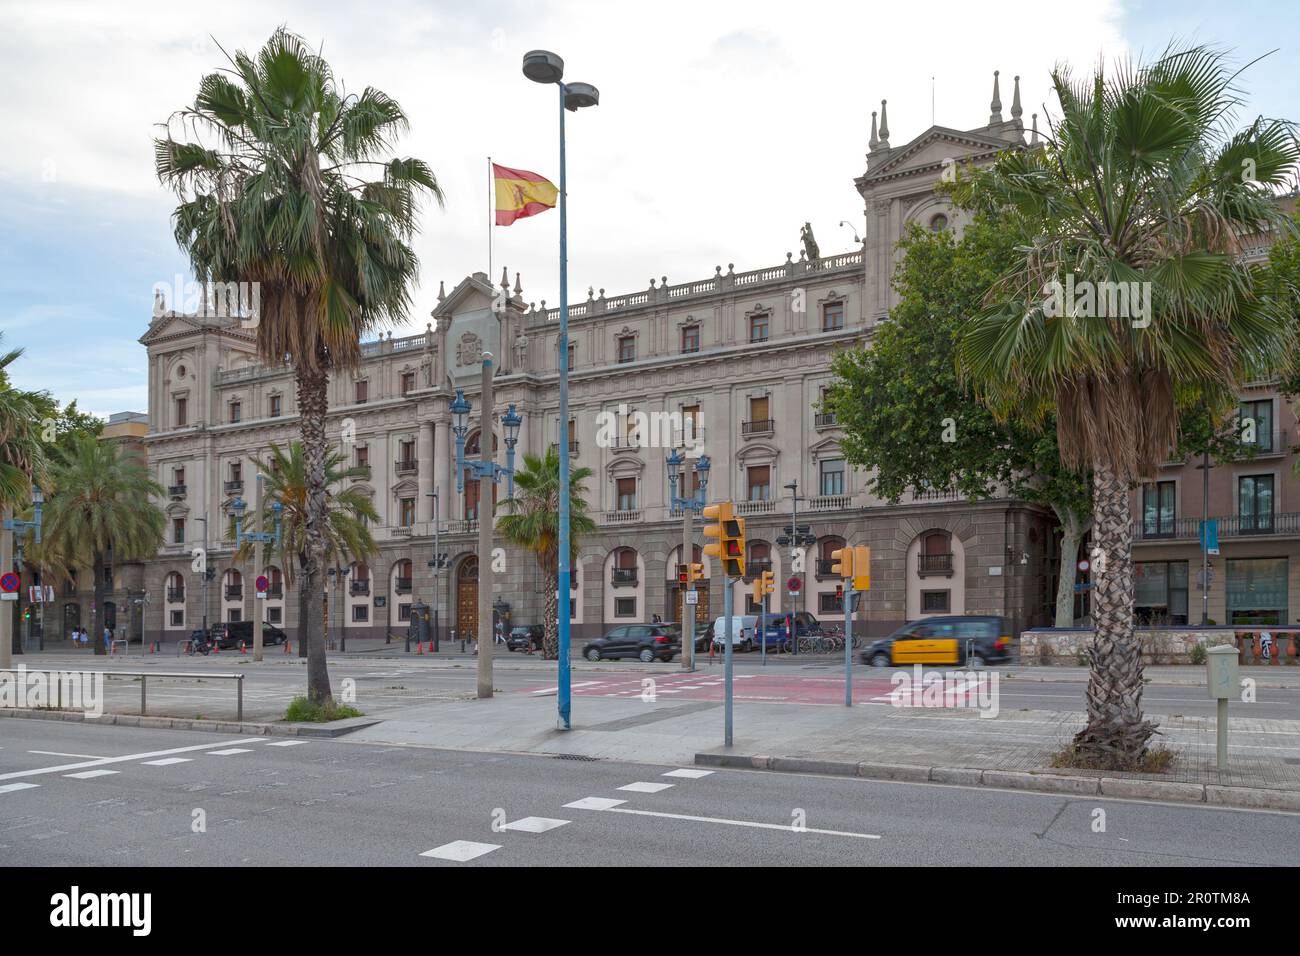 Barcelona, Spain - June 08 2018: Facade of the building of the General Captaincy on the Paseo de Colón opposite Port Vell. Stock Photo